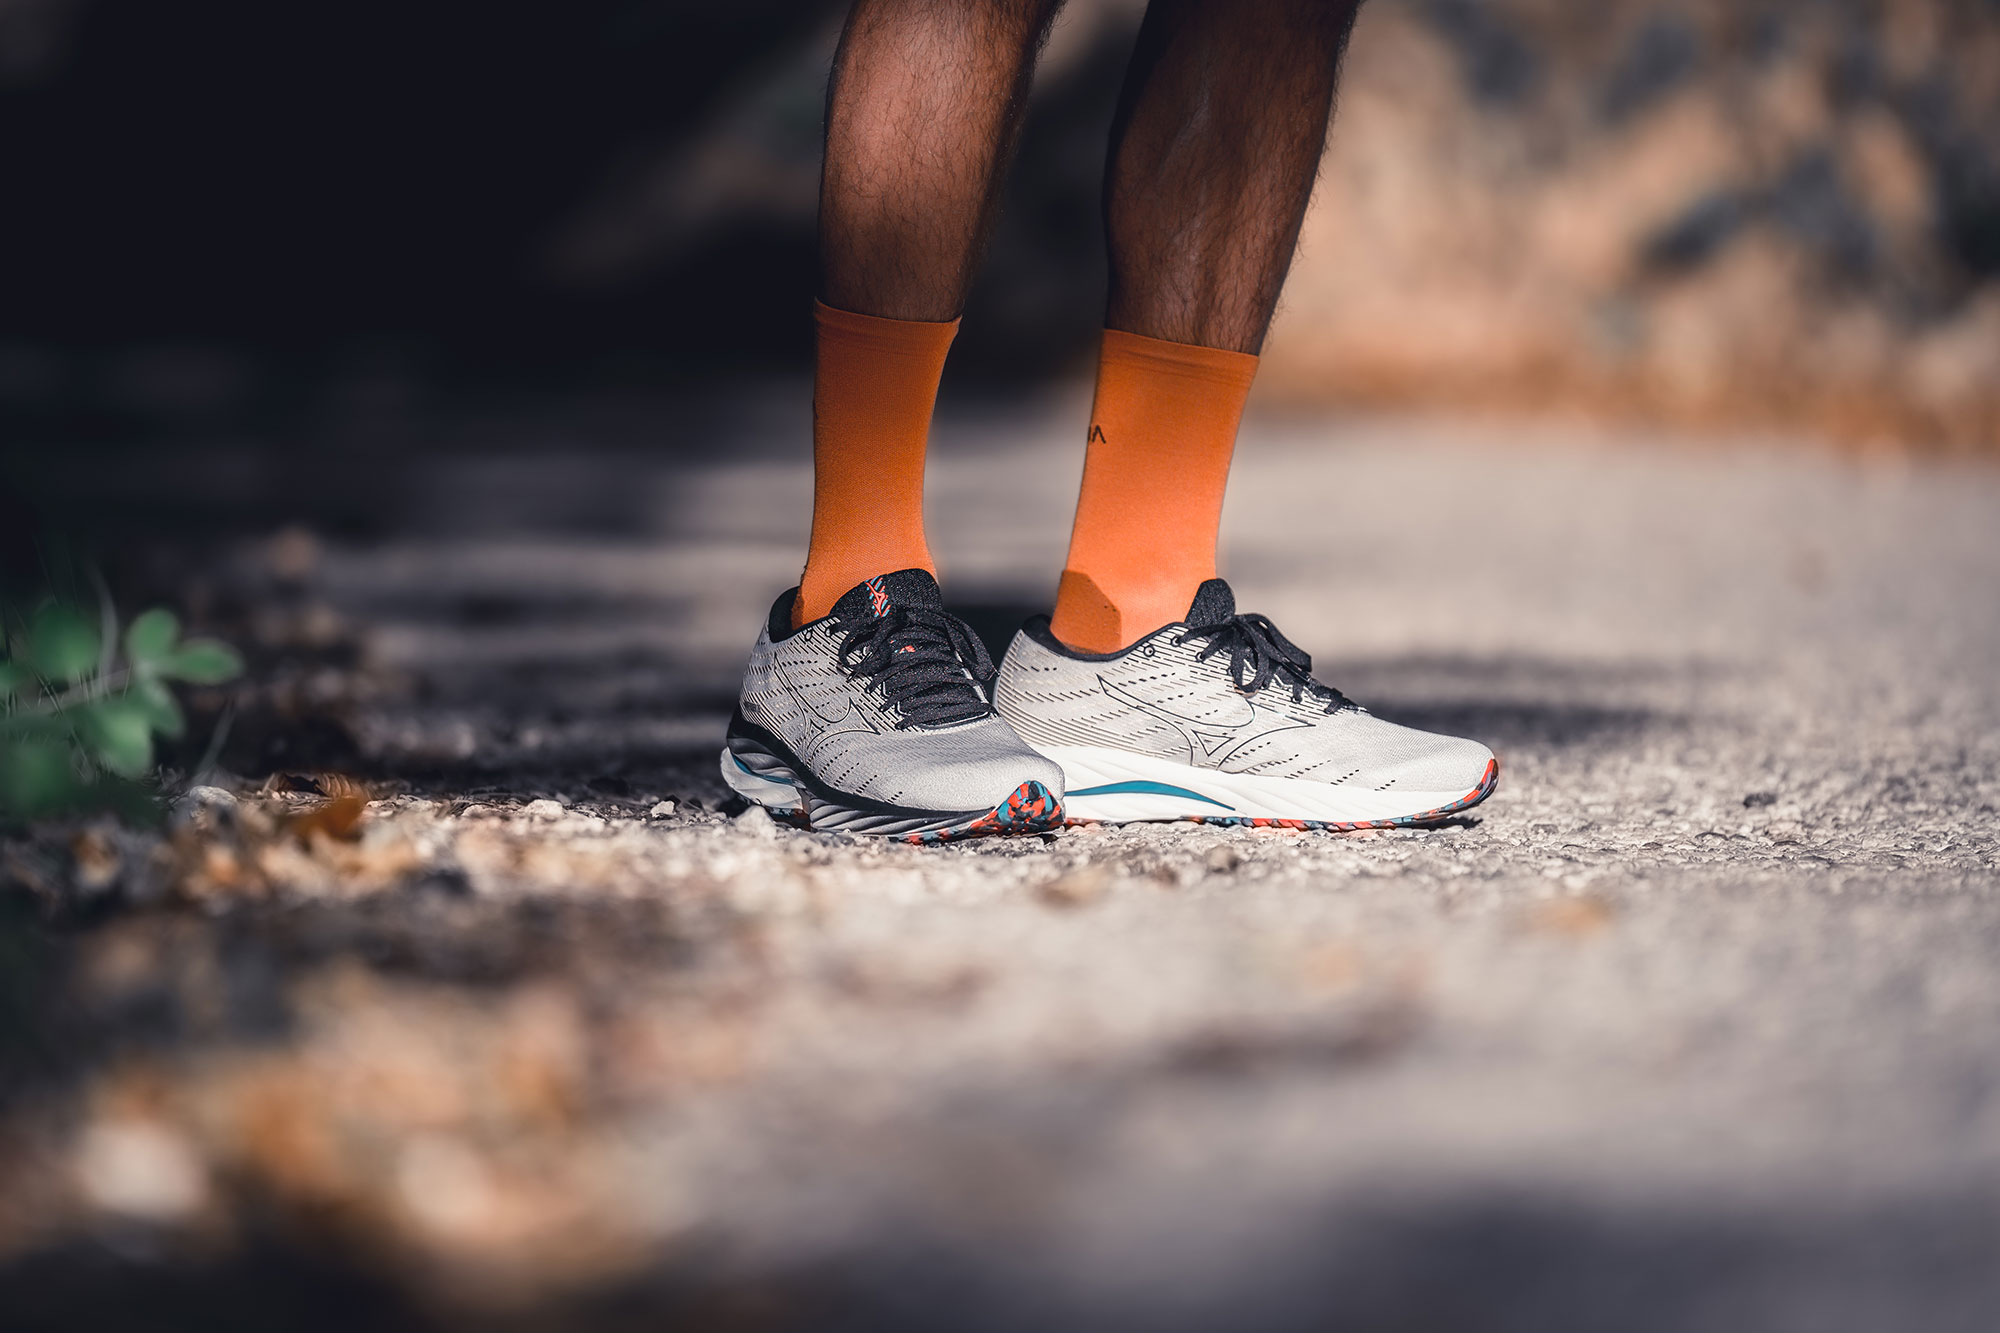 Mizuno Wave Rider 26: test by The Pill - The Pill Outdoor Journal